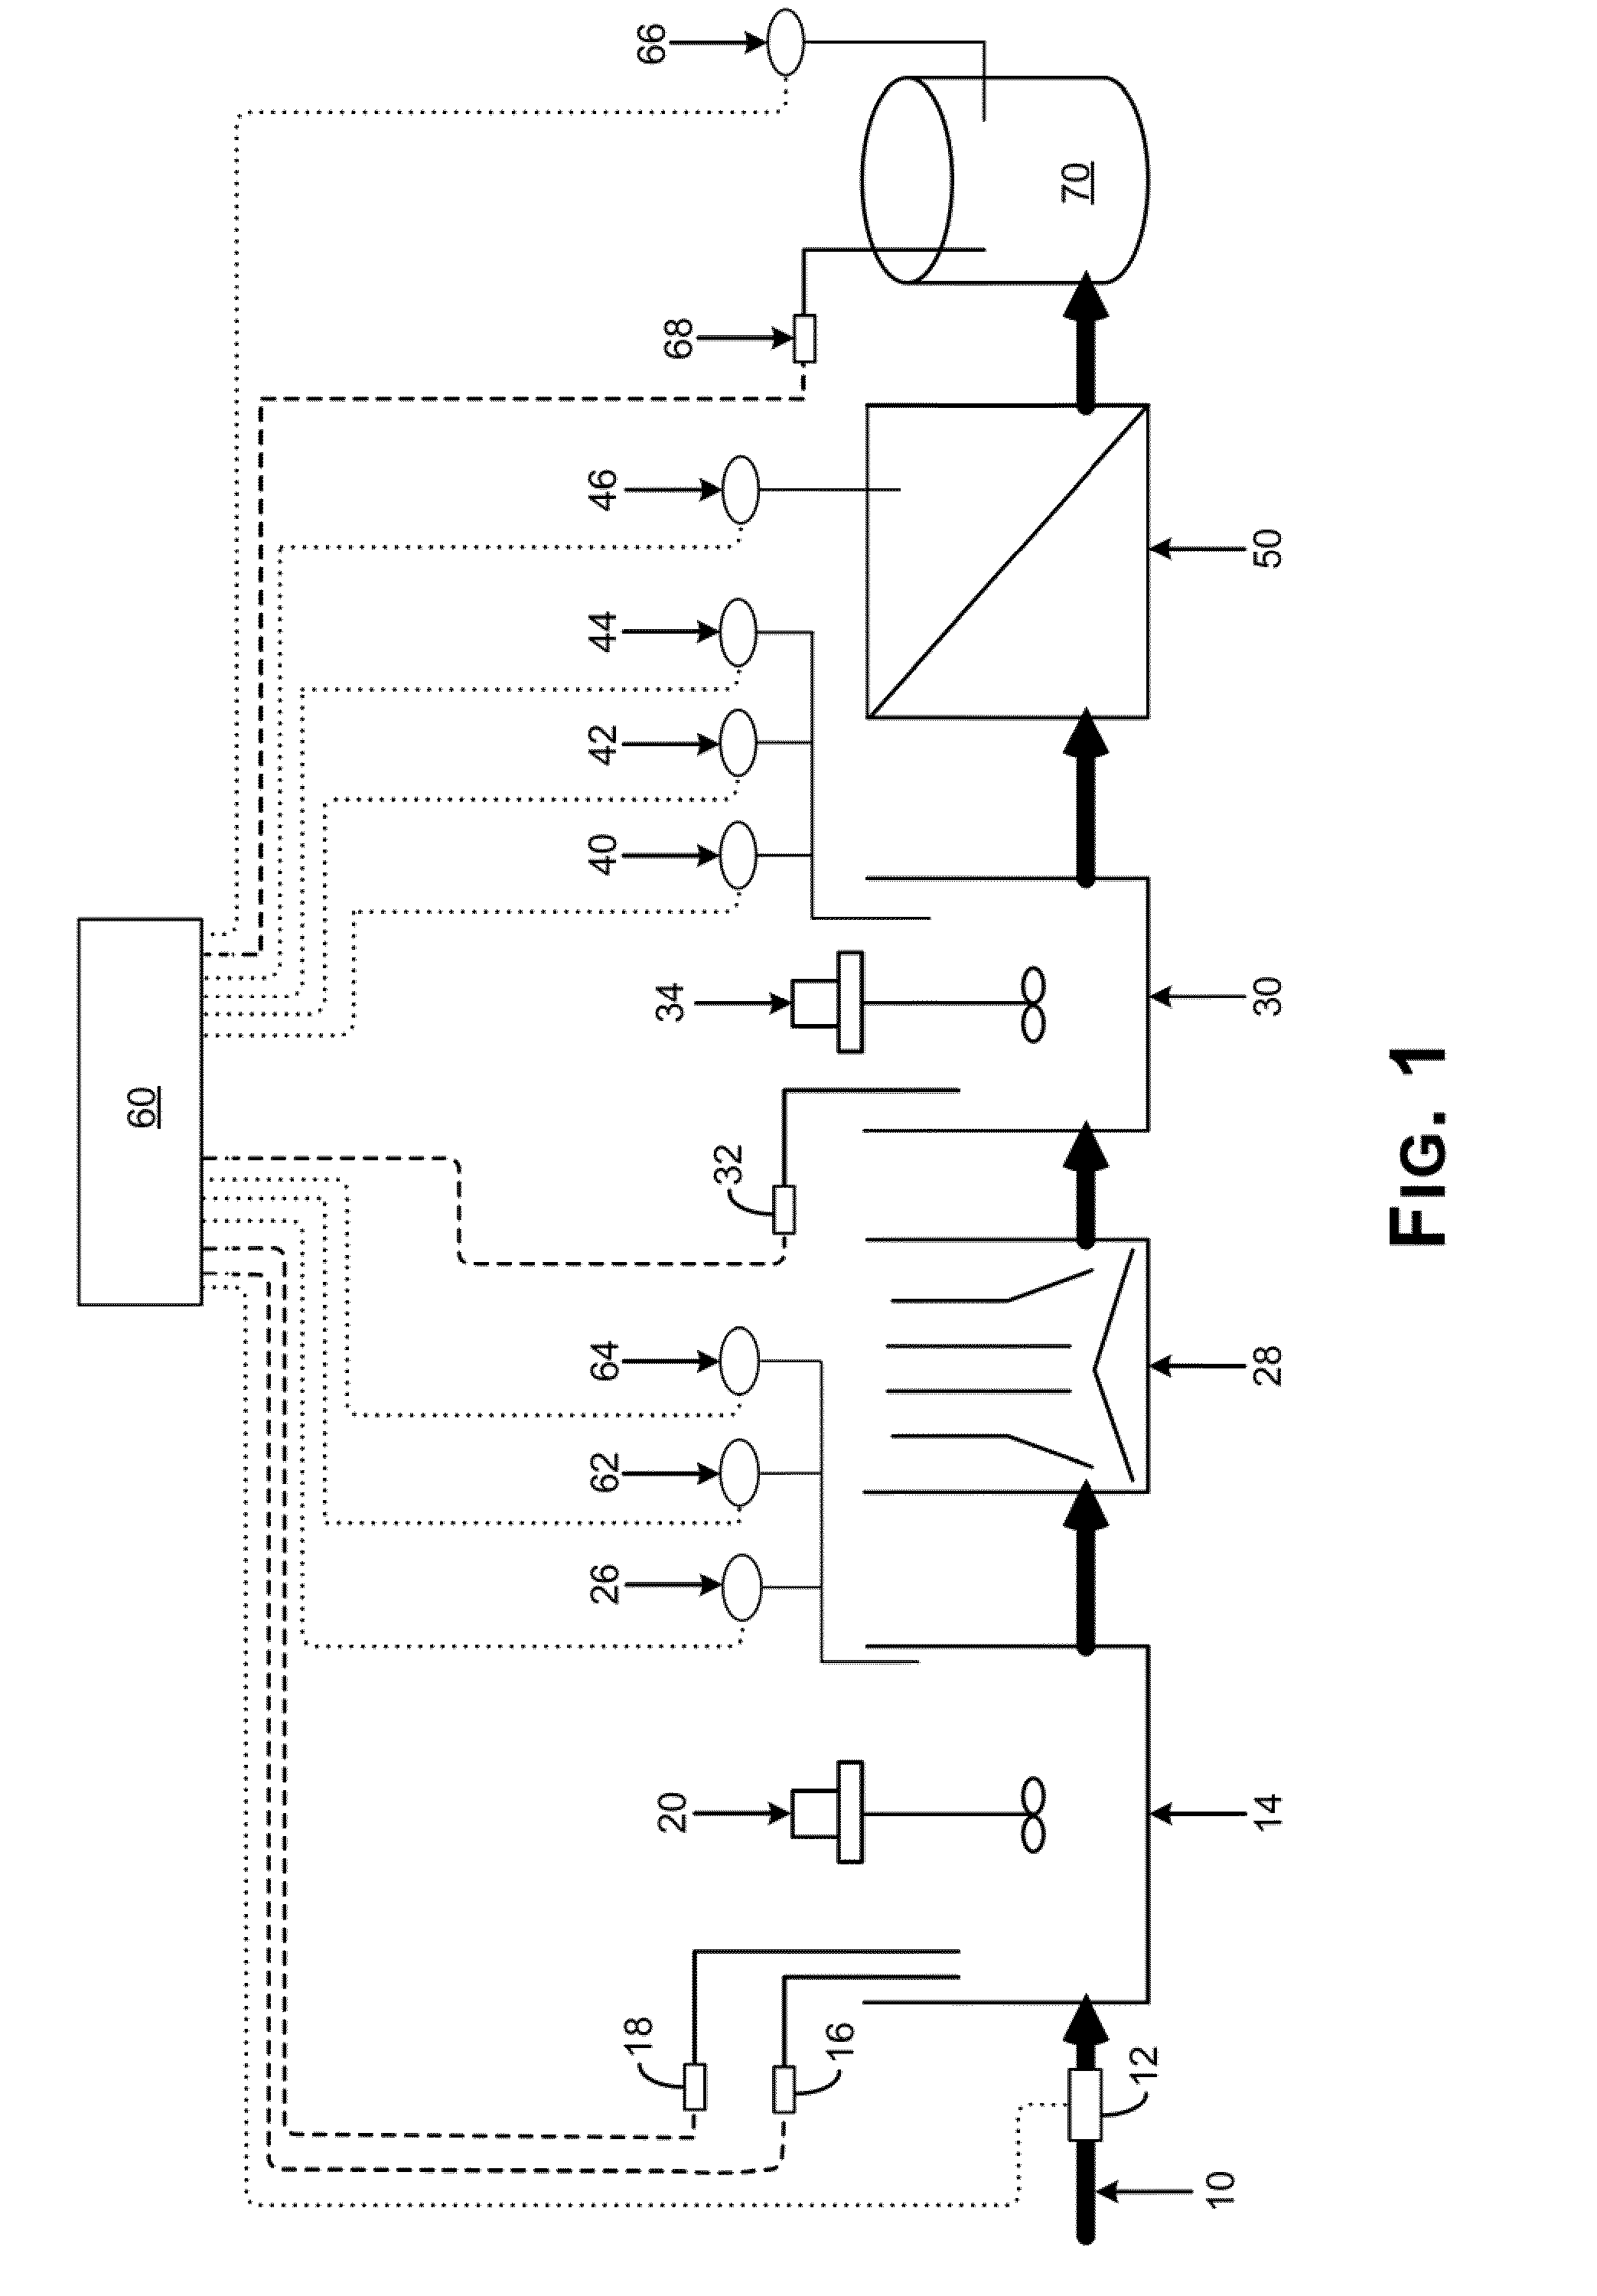 Process for enhanced total organic carbon removal while maintaining optimum membrane filter performance